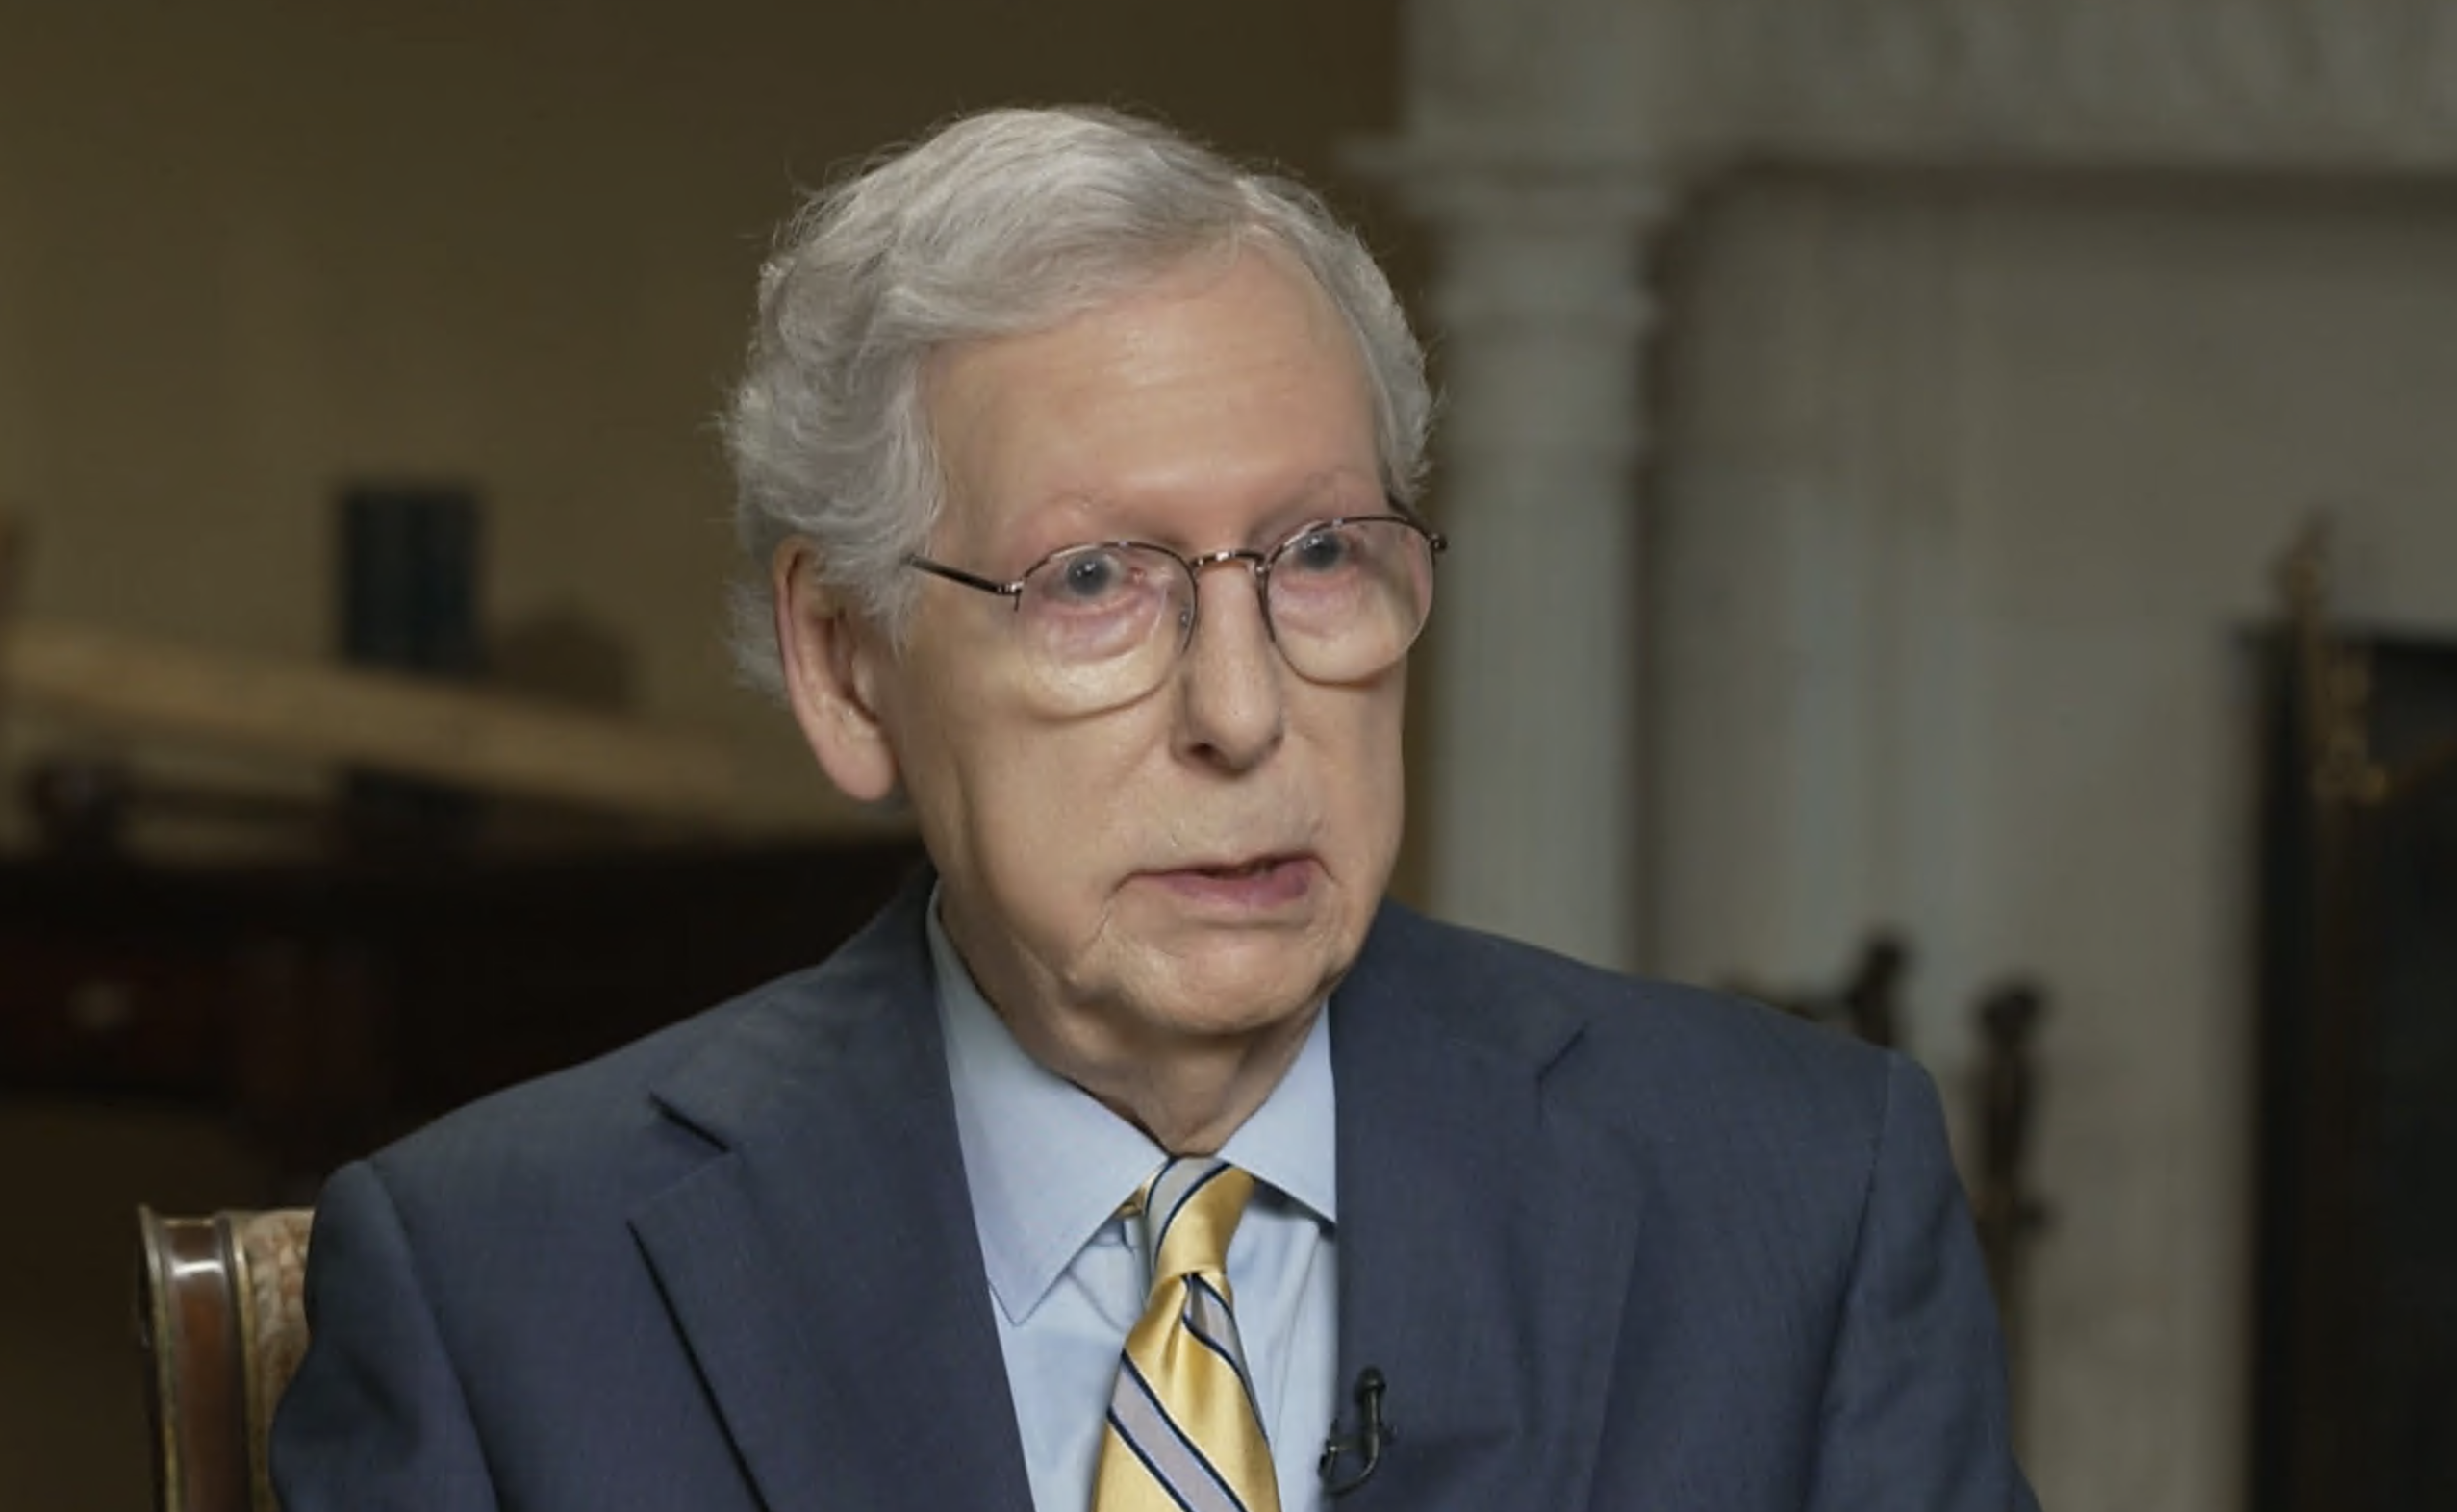 McConnell stands by past statement that ex-presidents are 